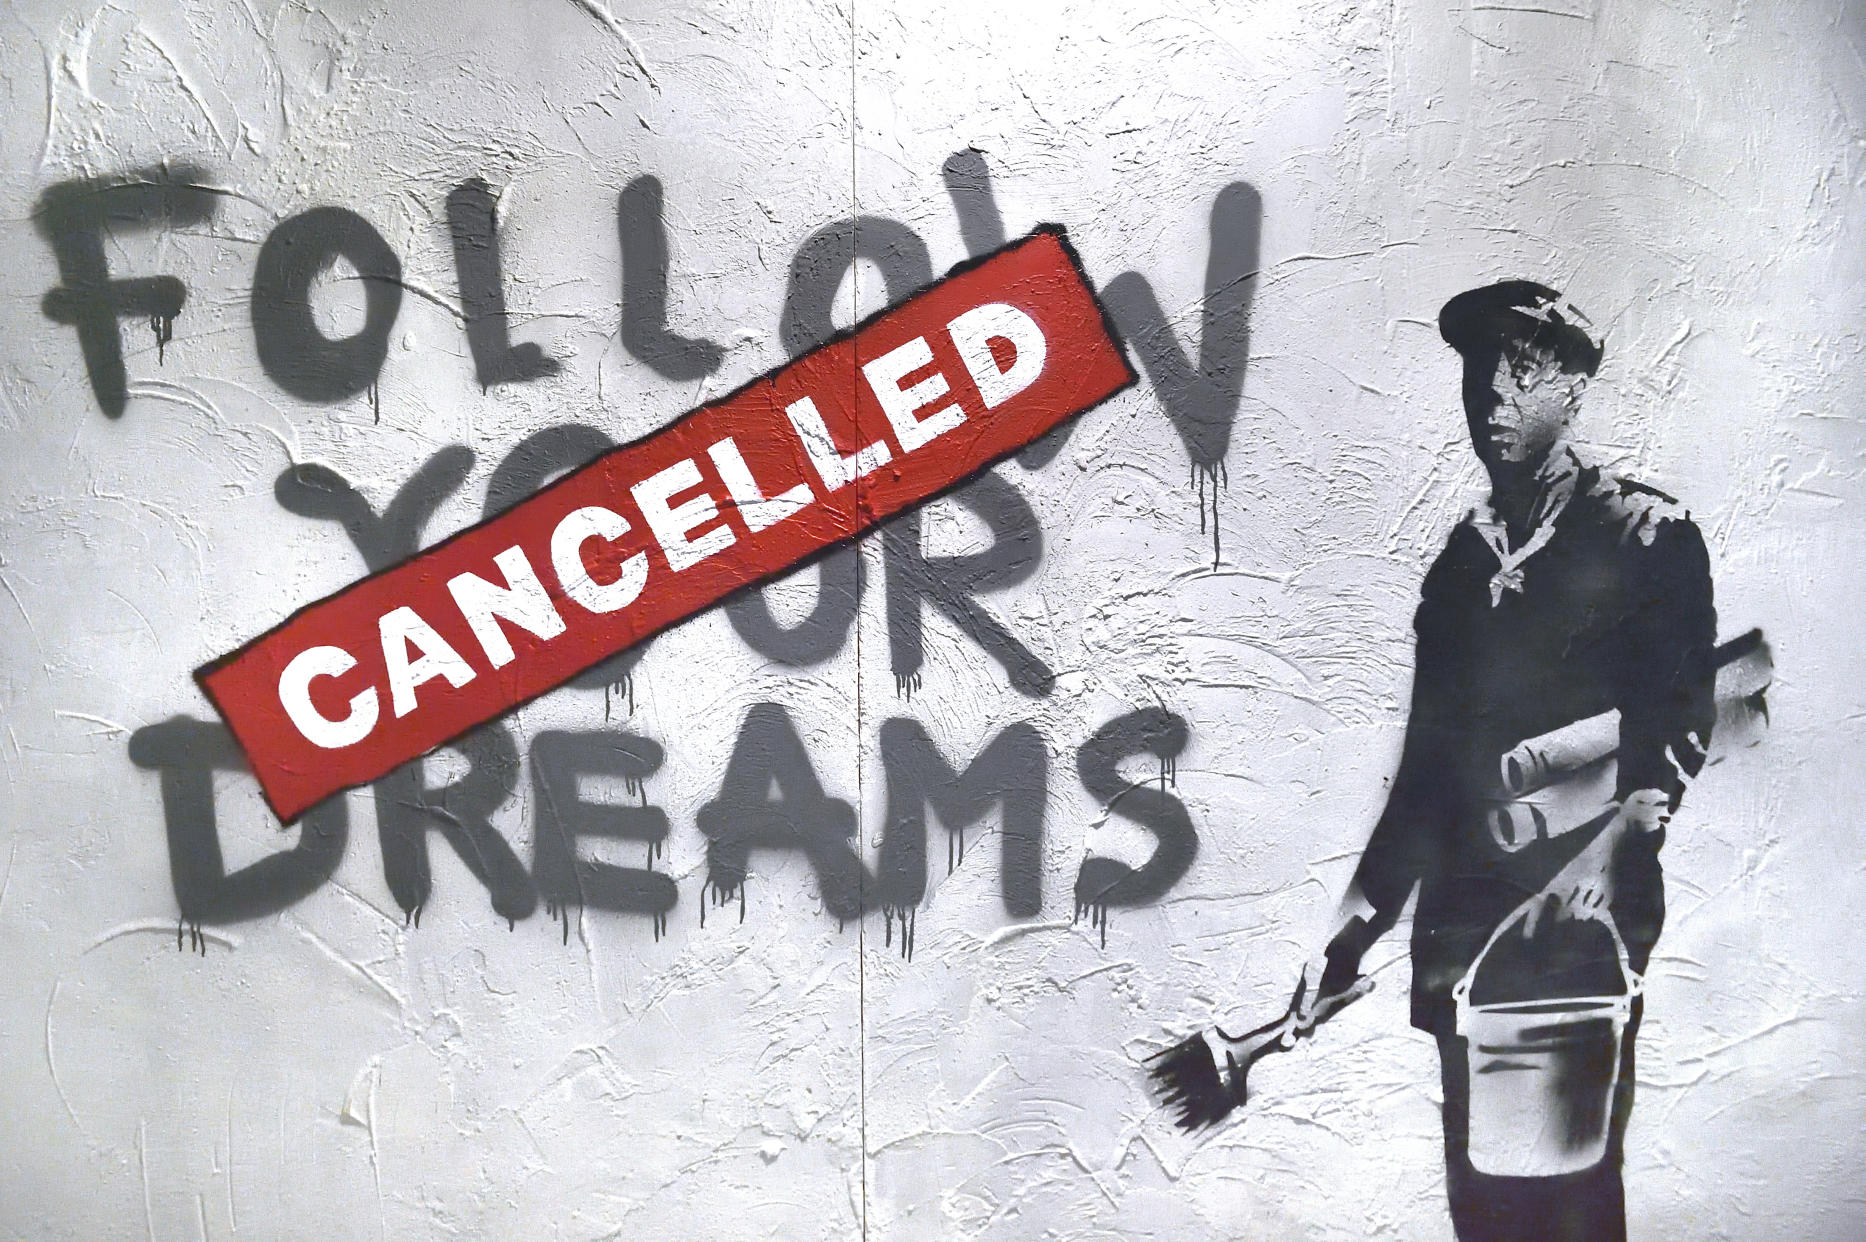 Banksy's has become famous for his distinctive street art. (Getty)